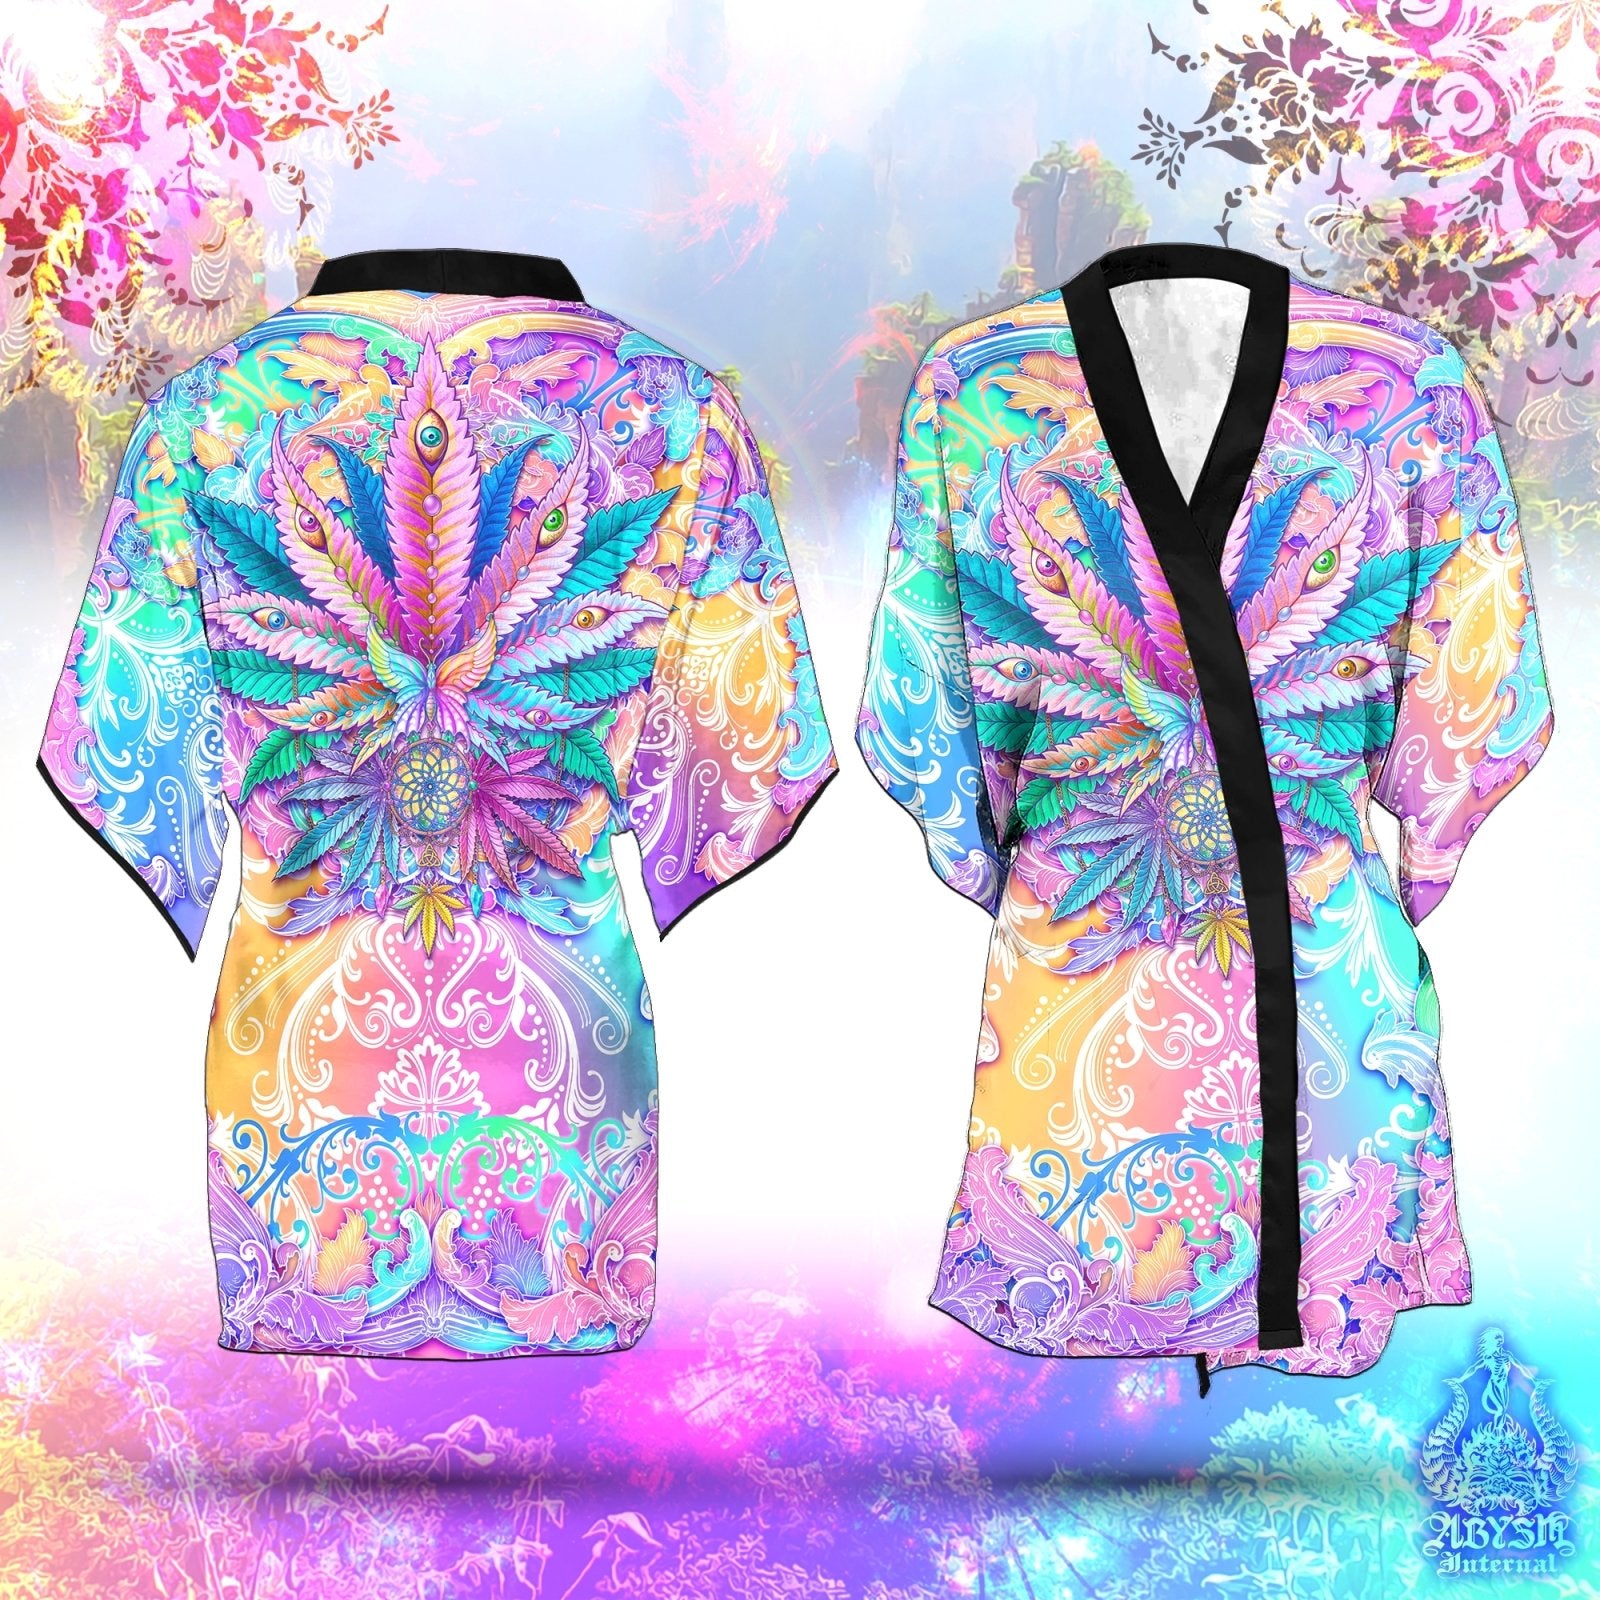 Cannabis Cover Up, Weed Outfit, Pastel Party Kimono, Aesthetic Summer Festival Robe, 420 Gift, Indie Clothing, Unisex - Marijuana - Abysm Internal